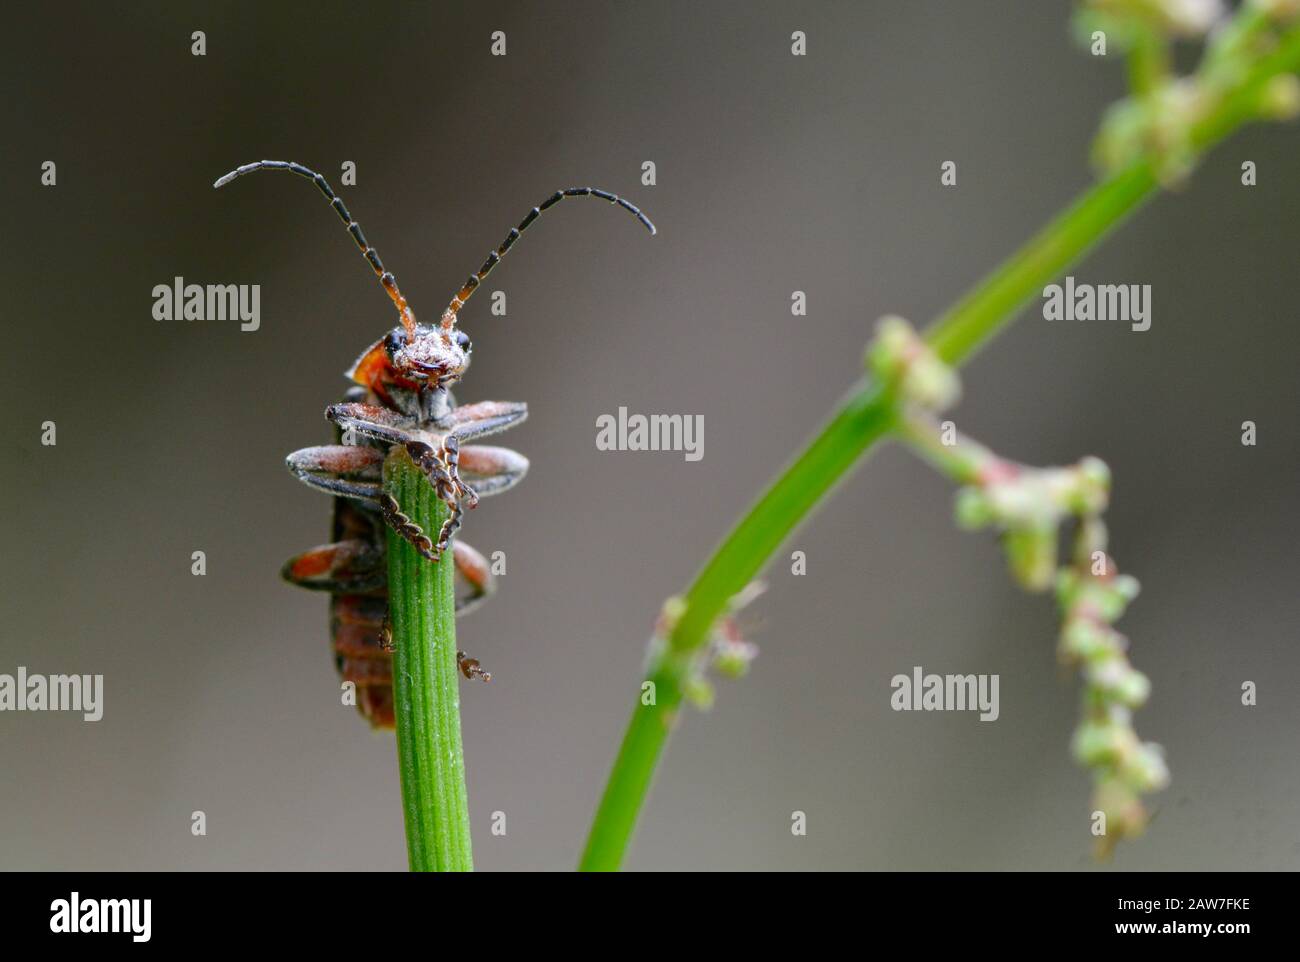 Soldier beetle clings to a plant stem Stock Photo